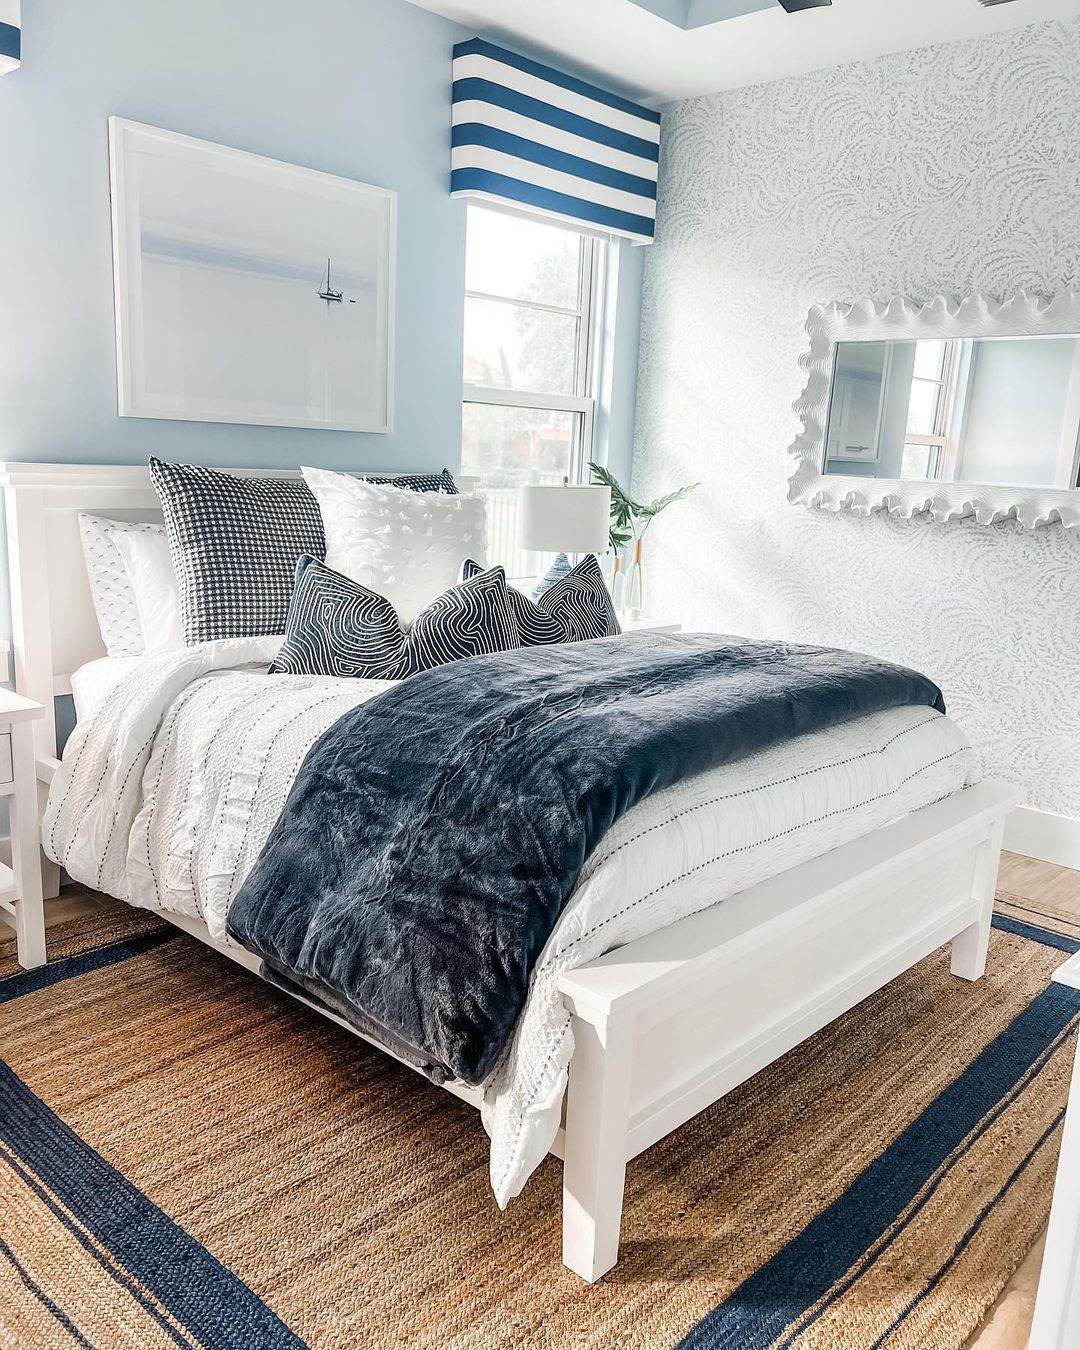 Blend Nautical Patterns with Cozy Textures